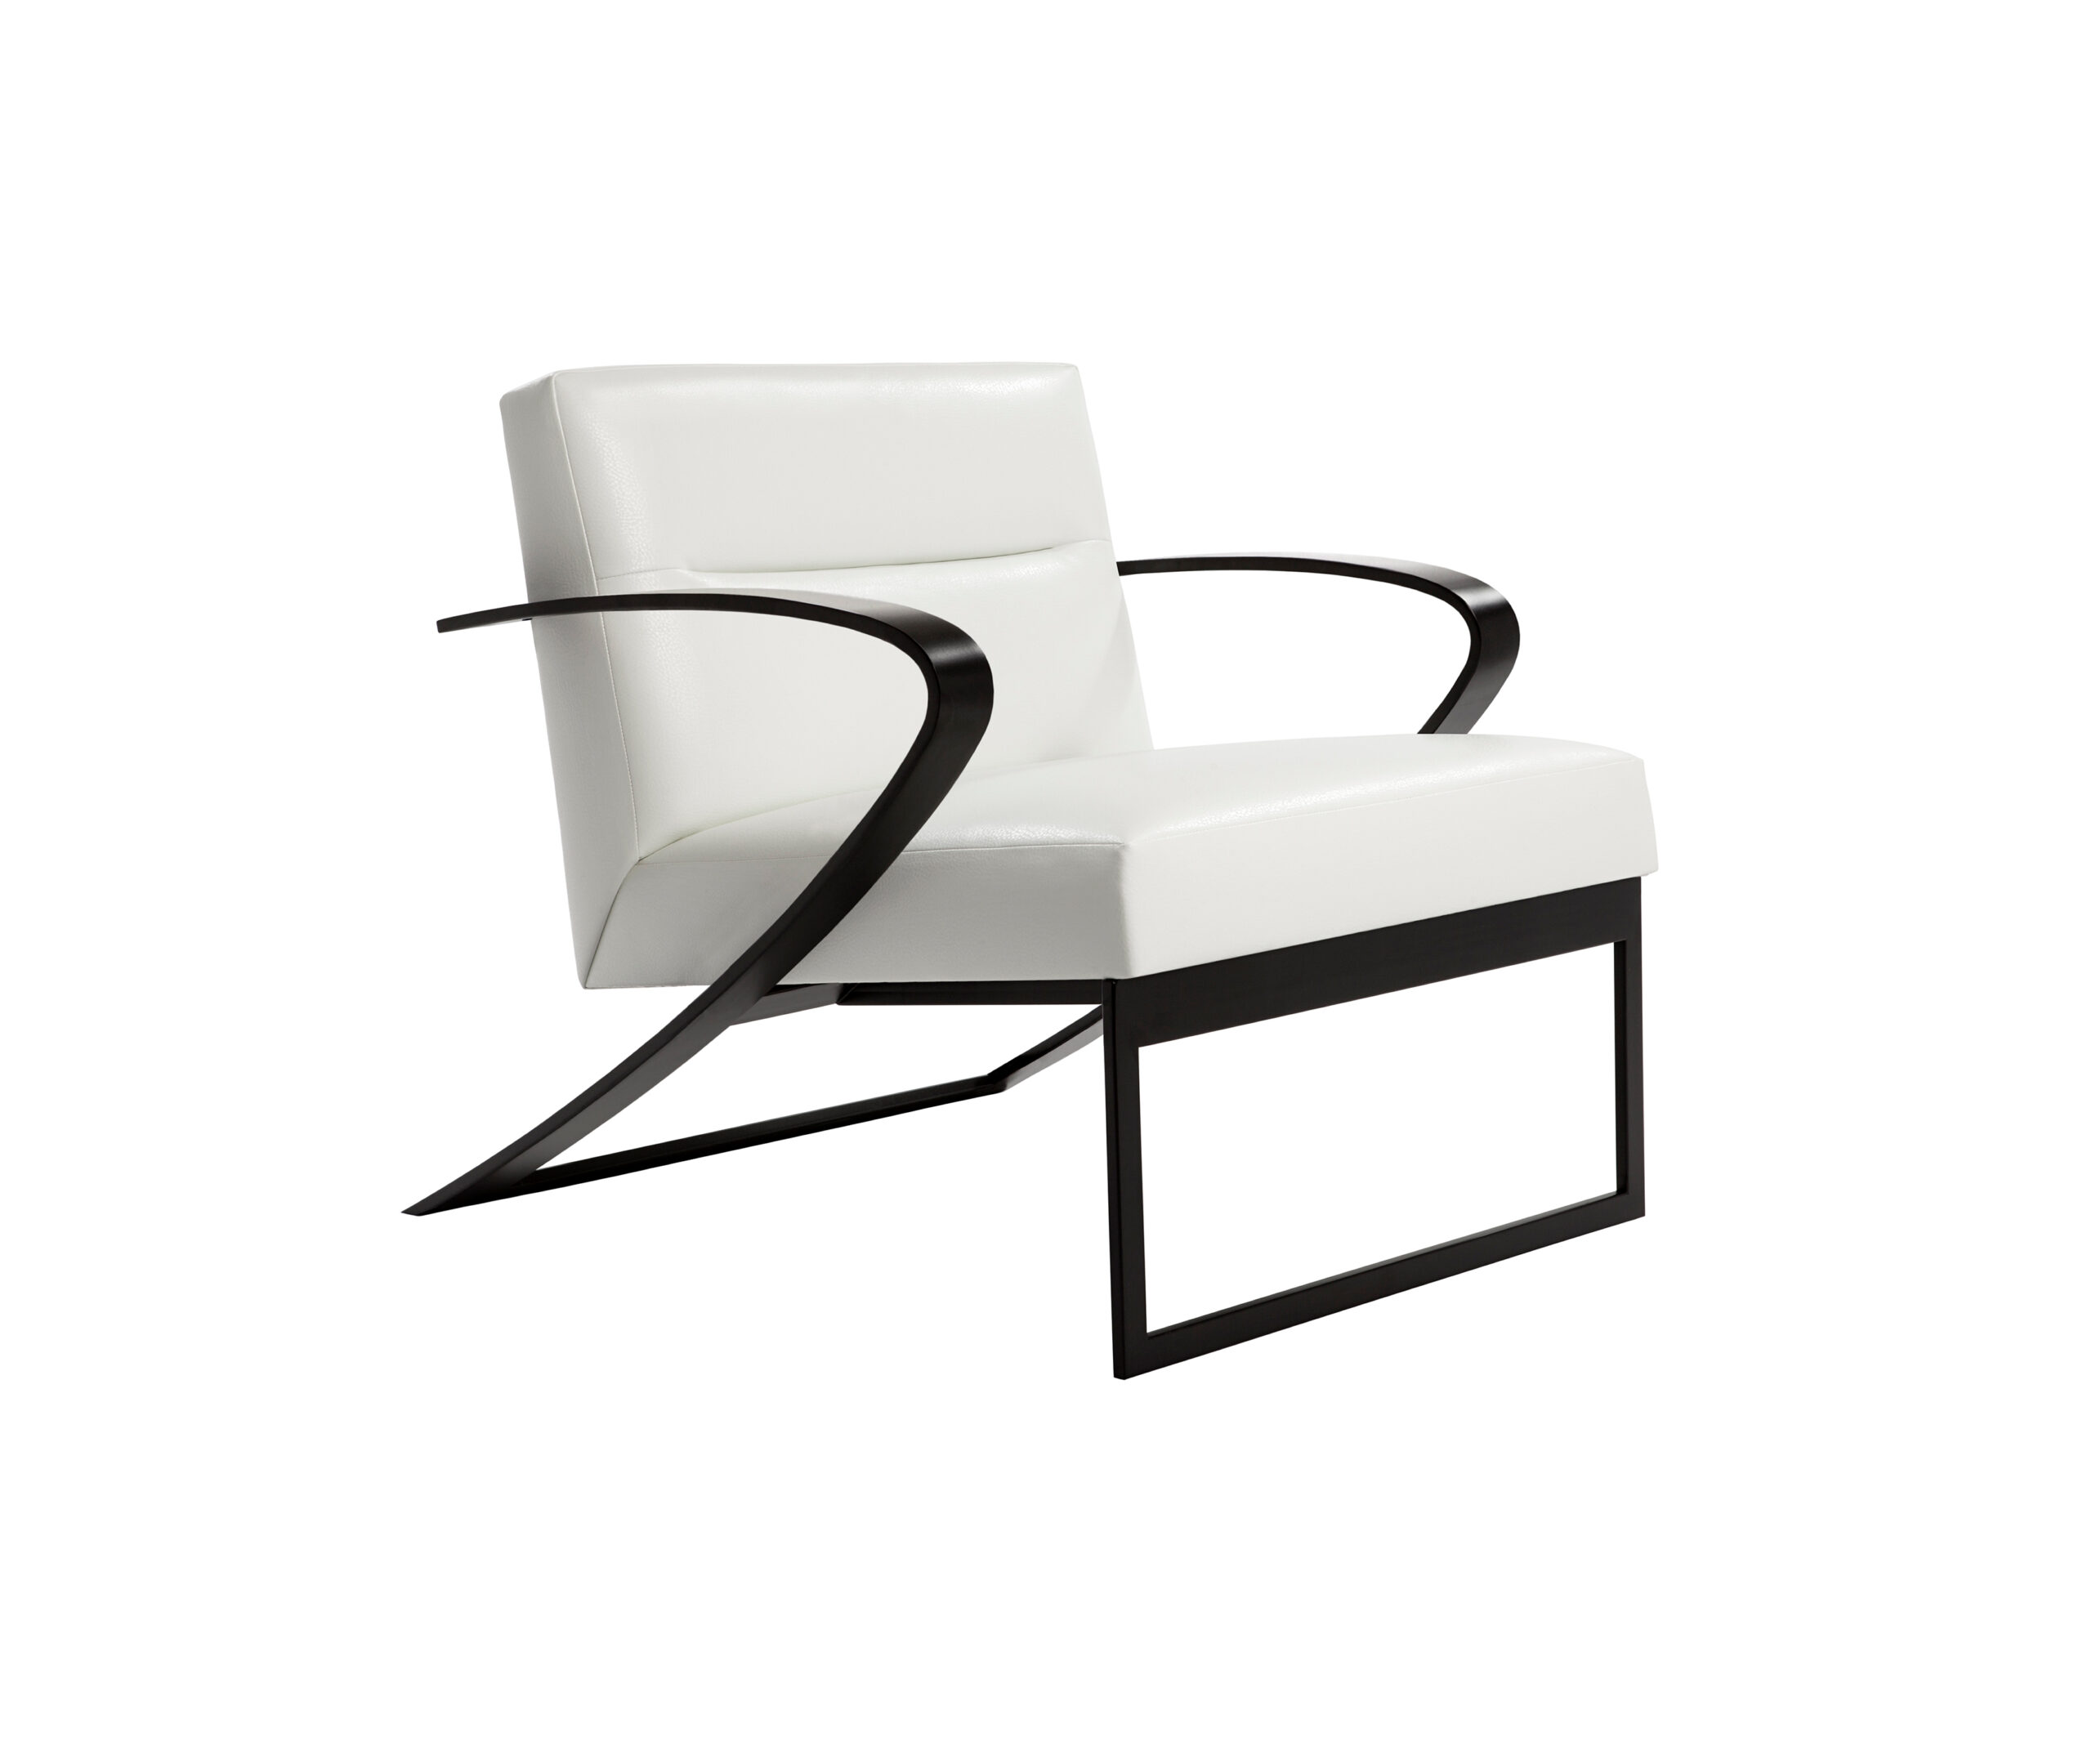 Dennis-Miller_Impala-Chair_int_products_2